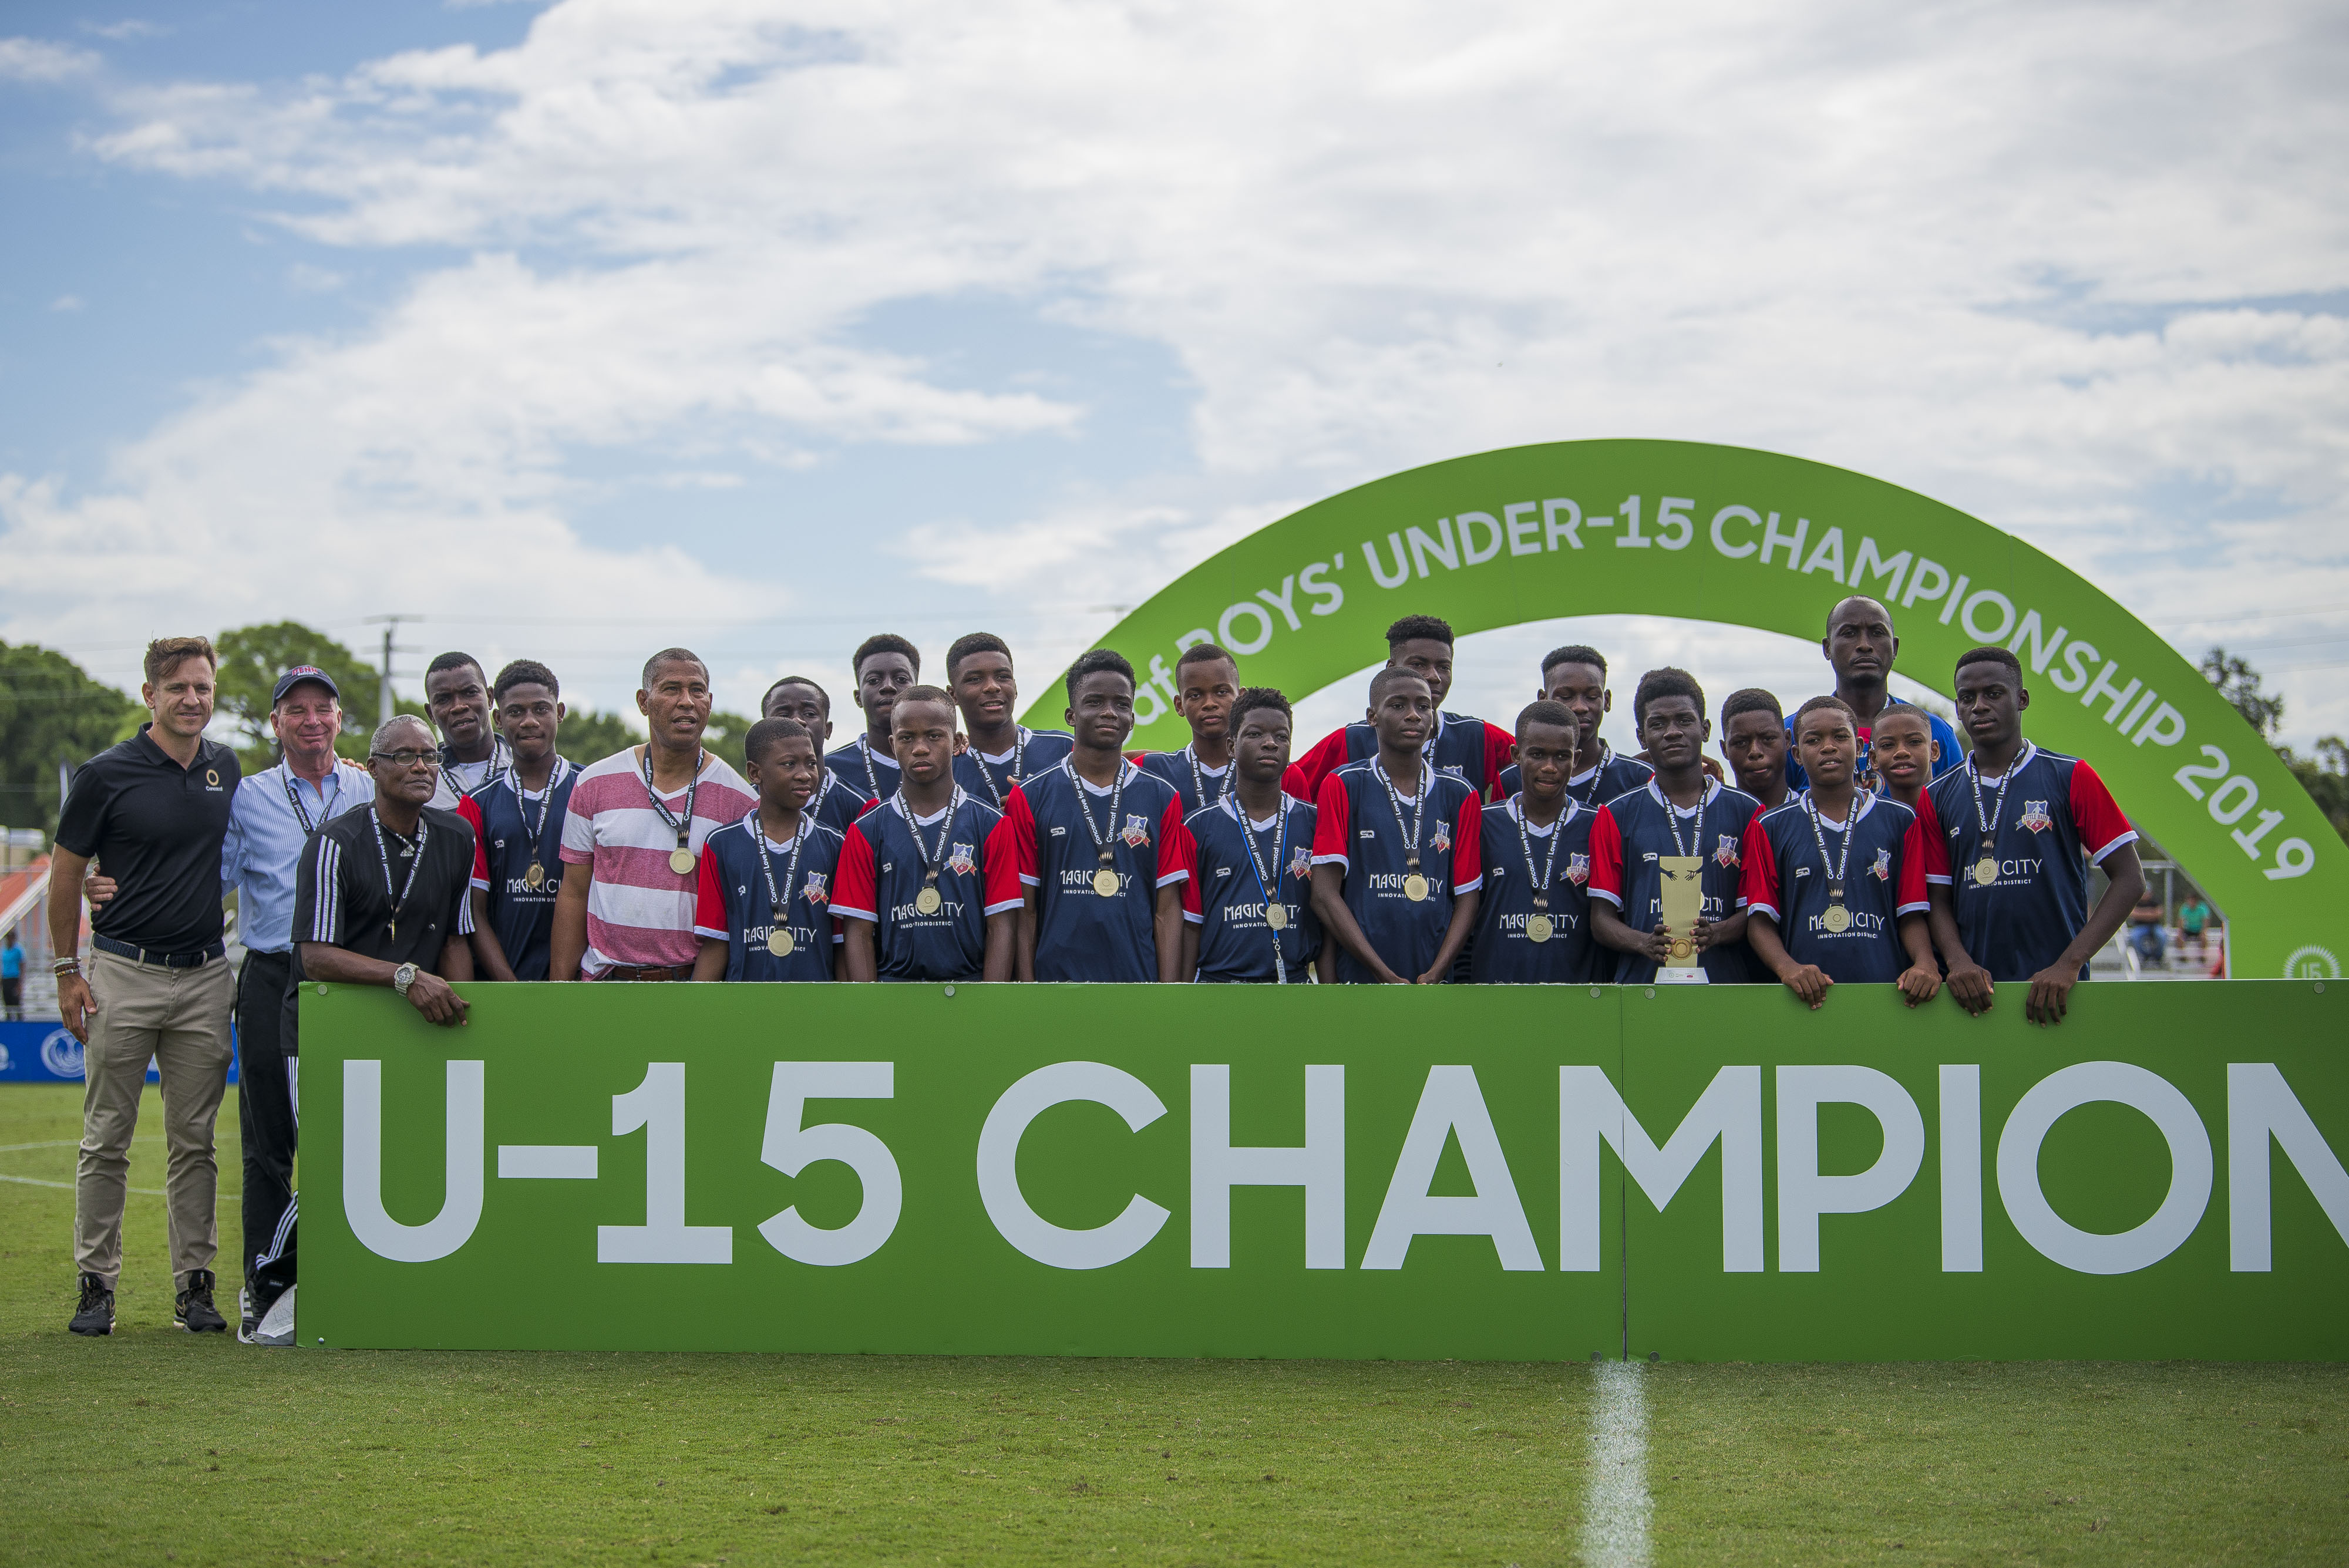 Concacaf Boys' Under-15 Championship: All You Need to Know